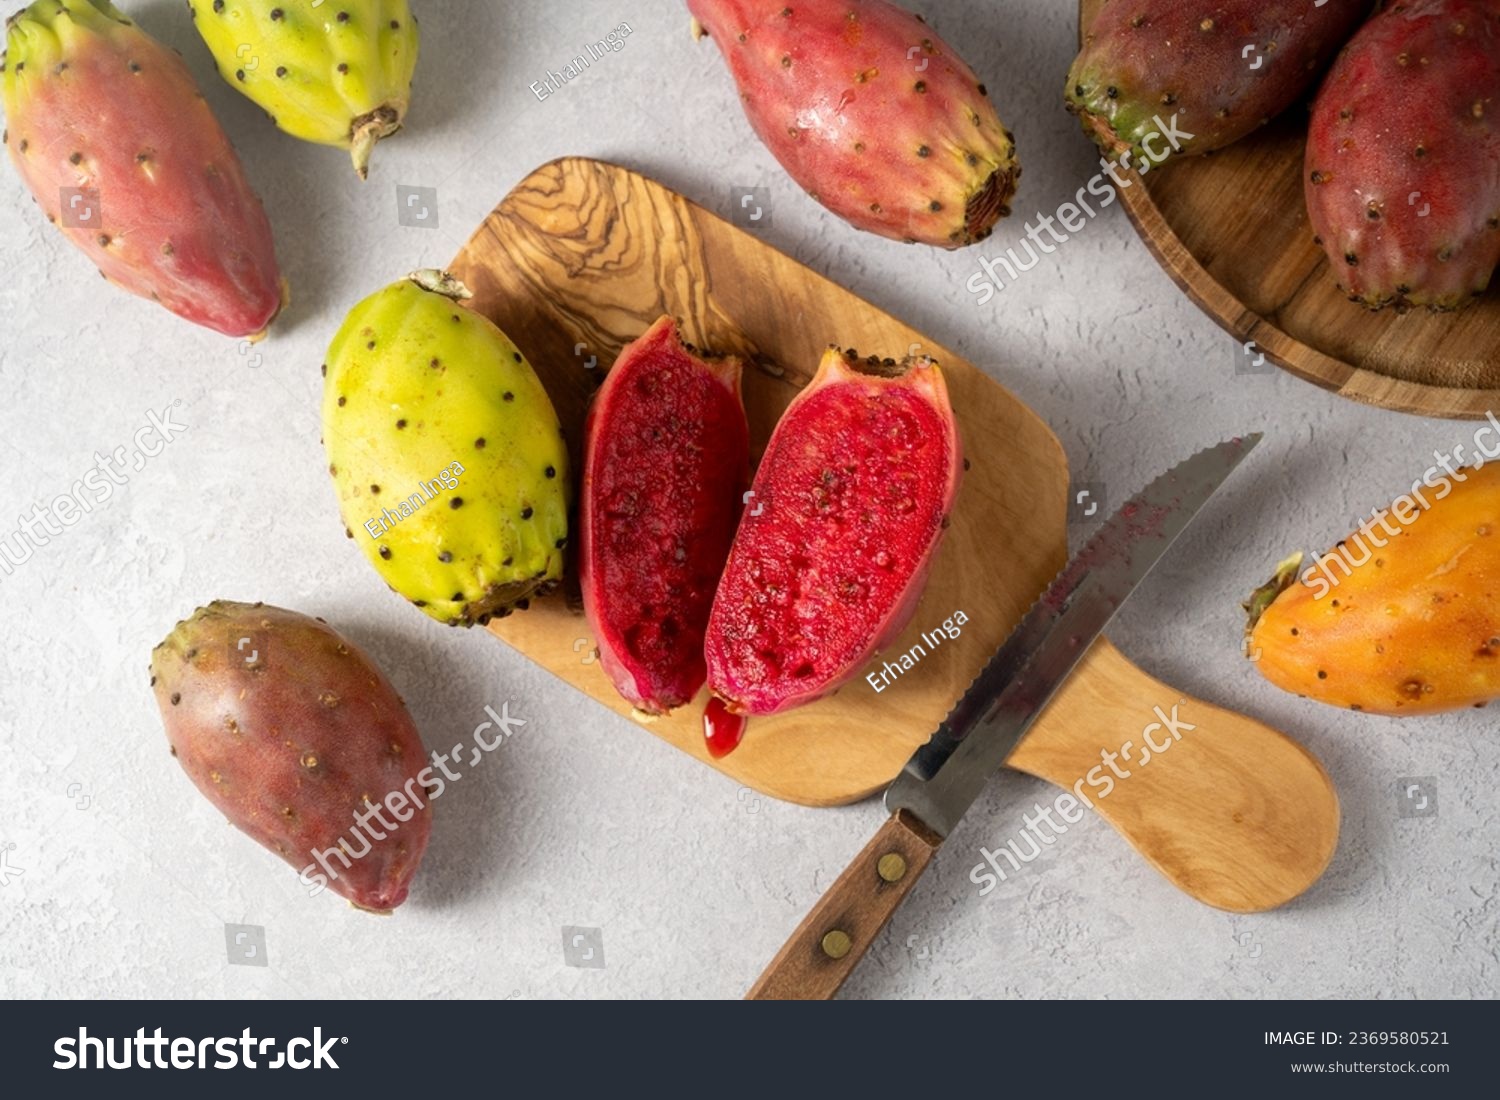 Prickly pears, exotic cactus fruits cut in halves, top view. #2369580521